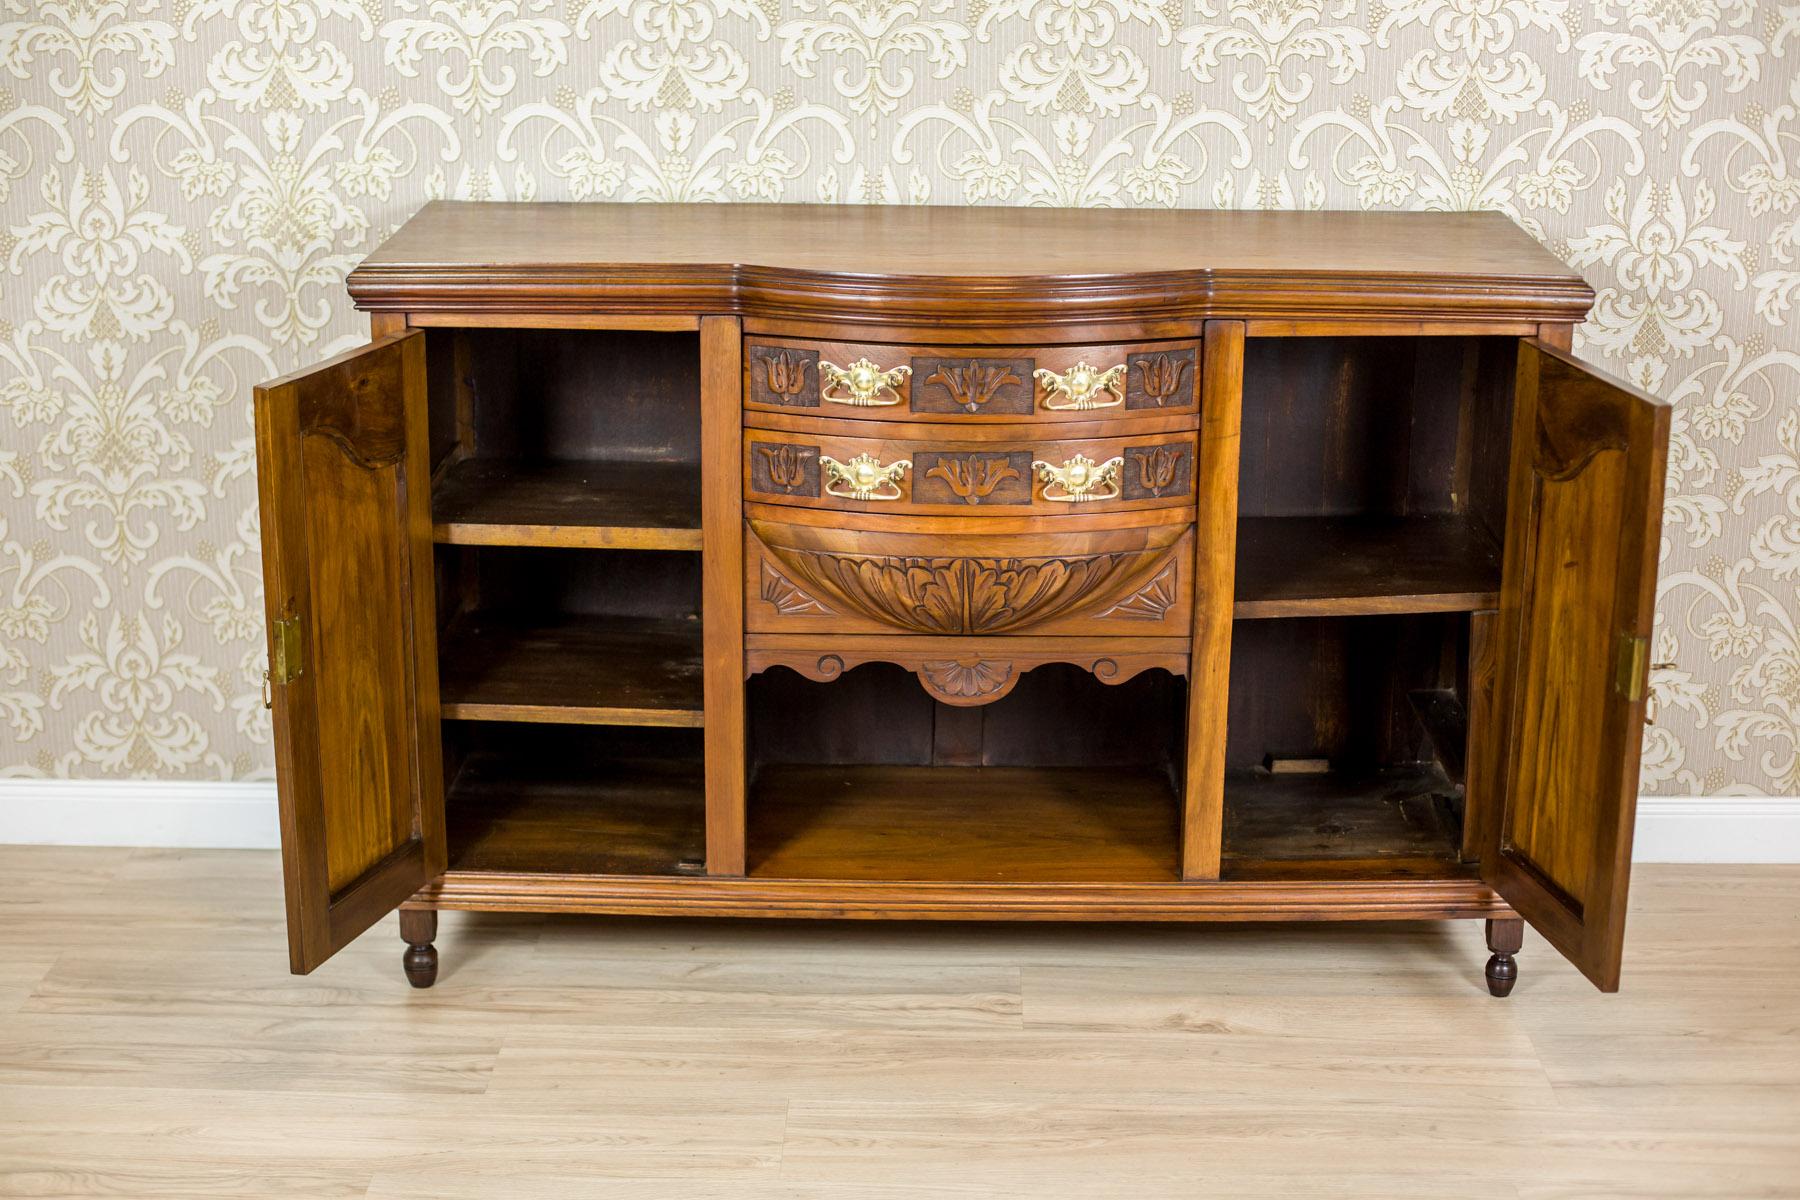 British Walnut Sideboard or Buffet, circa the Turn of the 19th and 20th Centuries